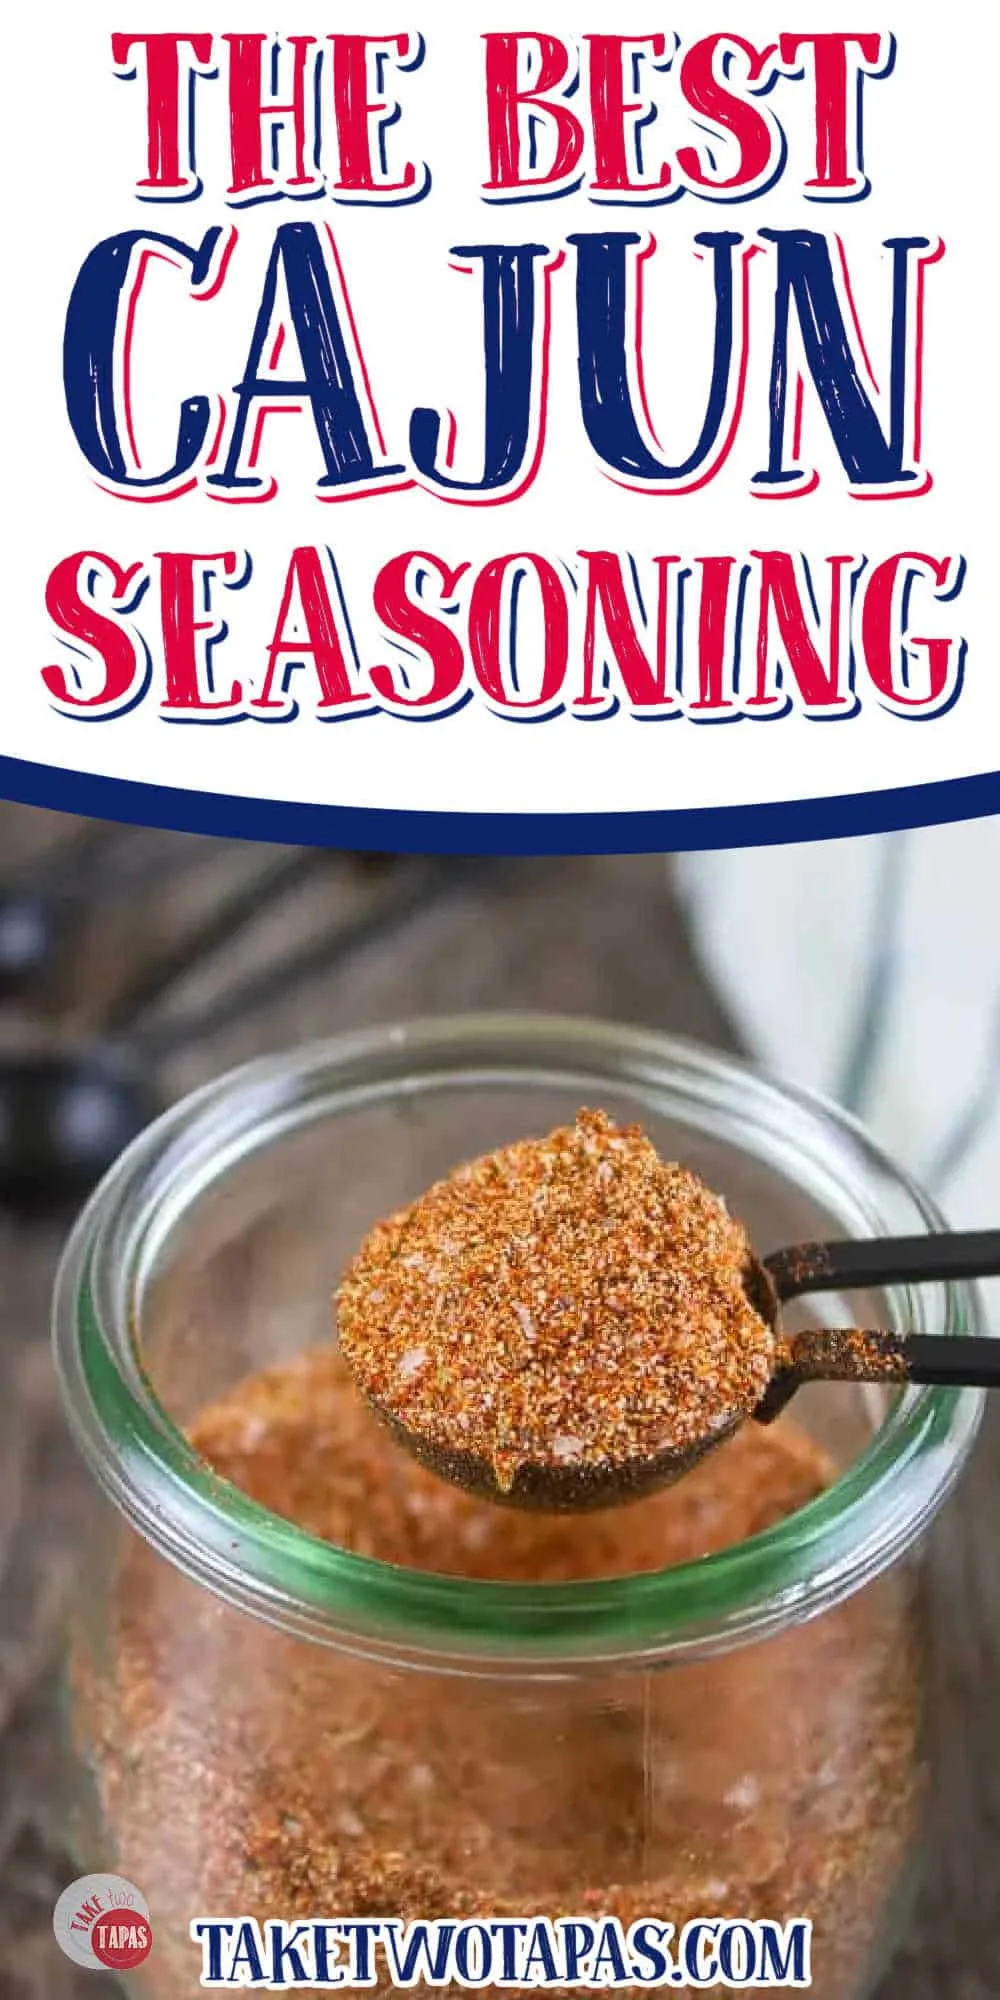 pinterest image of spice mix with text "the best cajun seasoning"